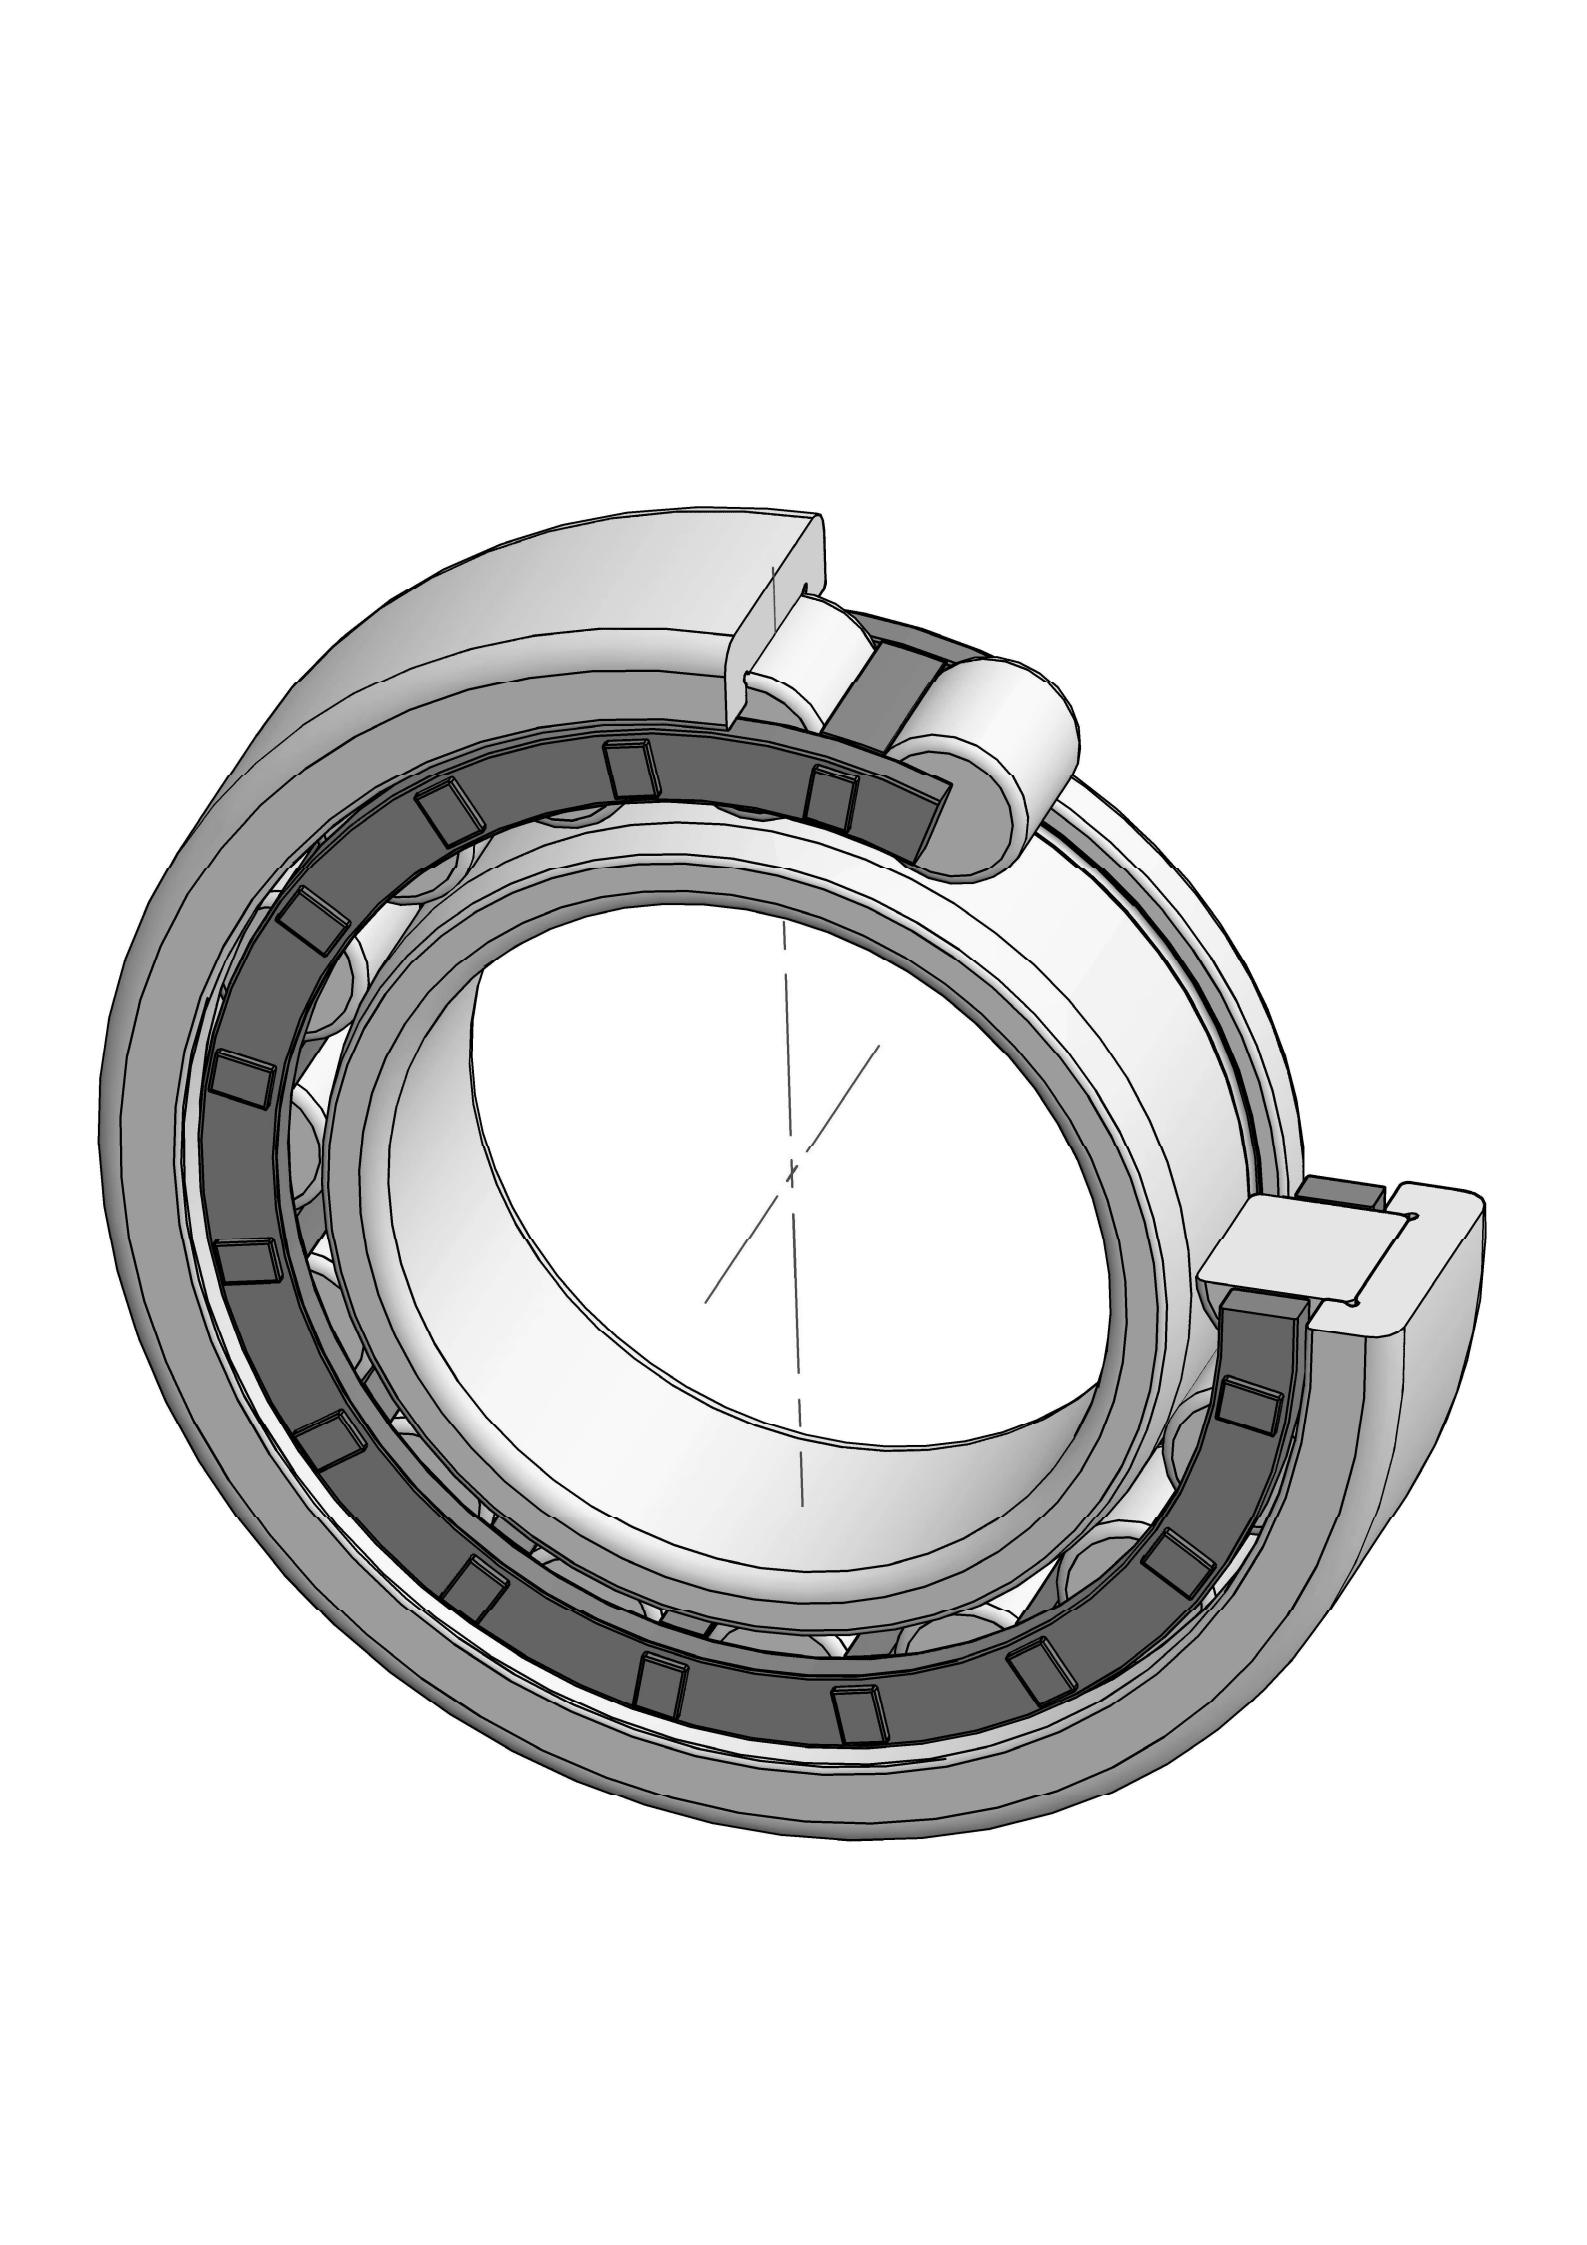 What Is a Convex Roller Bearing and How Does It Work?